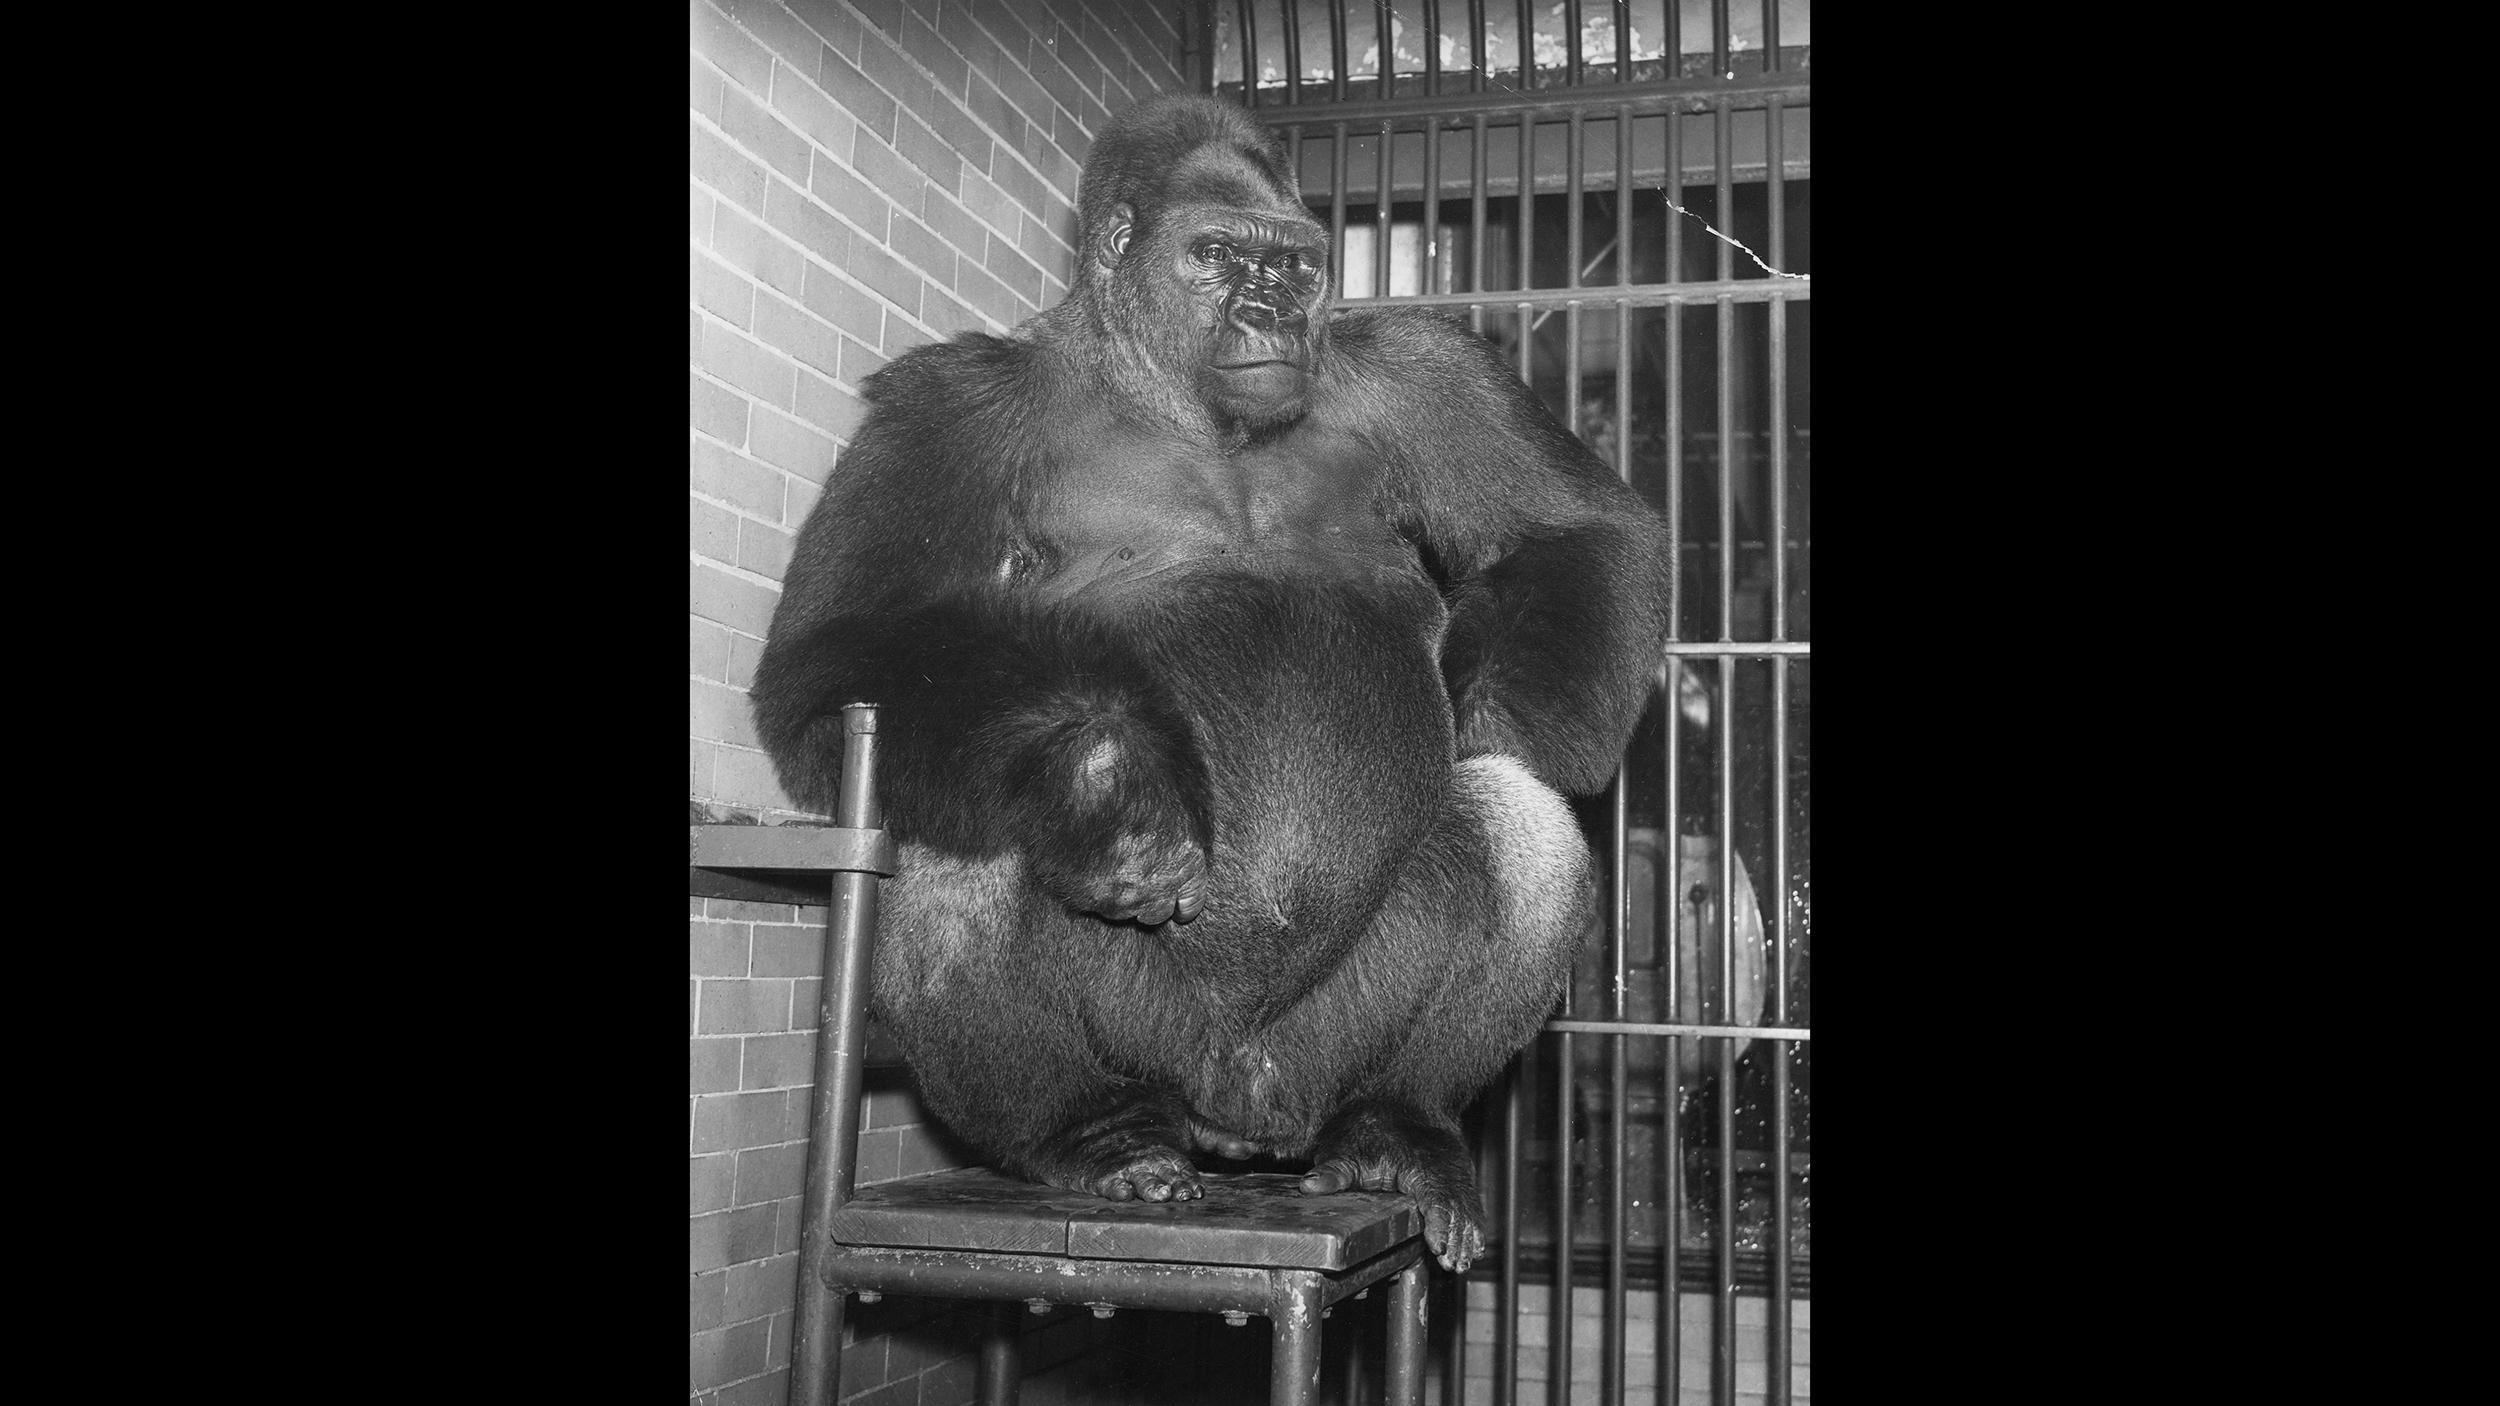 Western lowland gorilla Bushman, shown here sitting on his preferred chair in the 1940s, was arguably the most iconic zoo animal of his era. Bushman's chair will be on display at "From Swans to Science: 150 Years of Lincoln Park Zoo." (Courtesy Chicago Park District and Chicago History Museum)